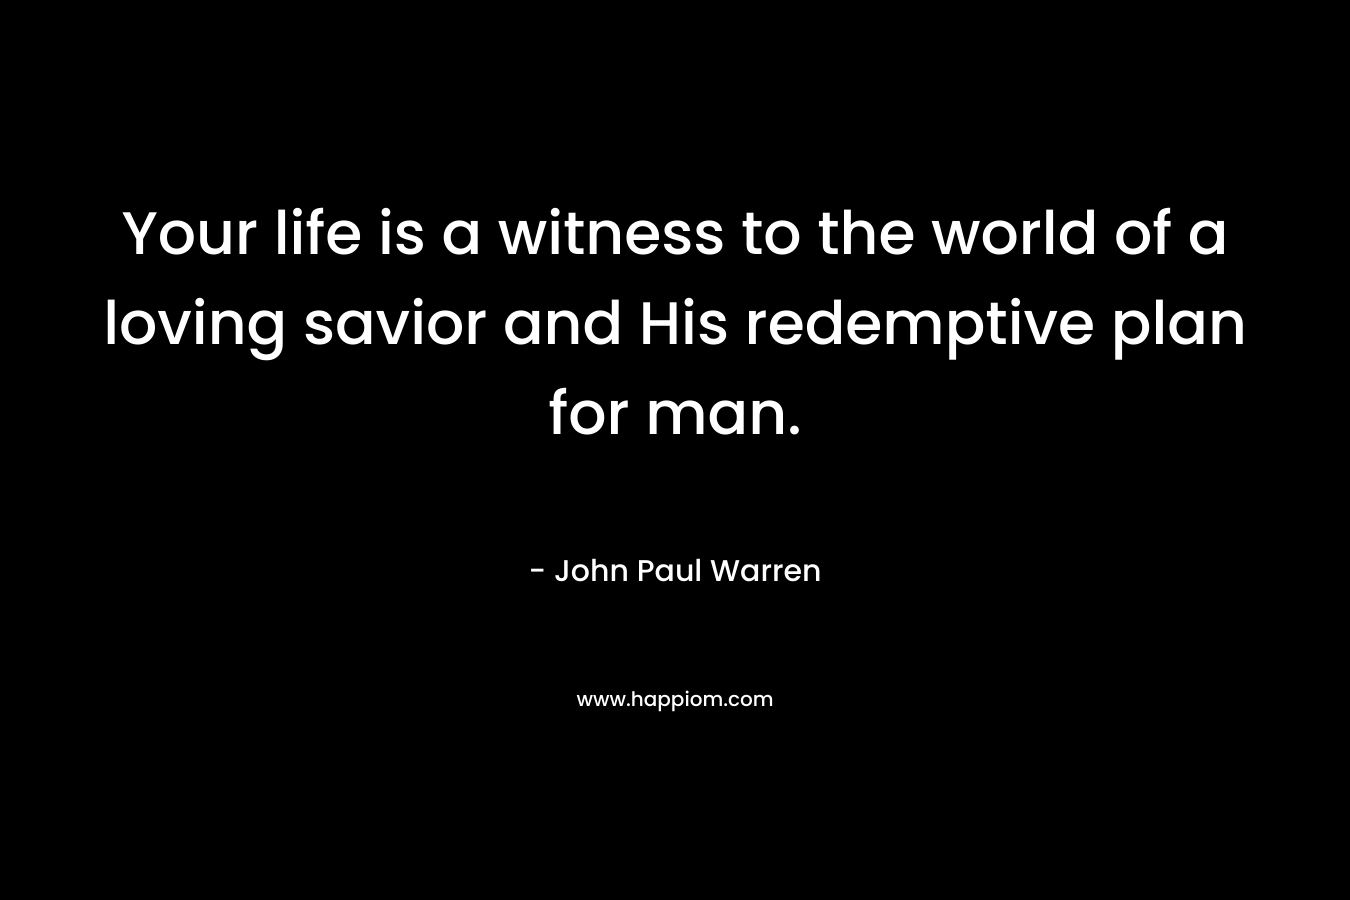 Your life is a witness to the world of a loving savior and His redemptive plan for man.